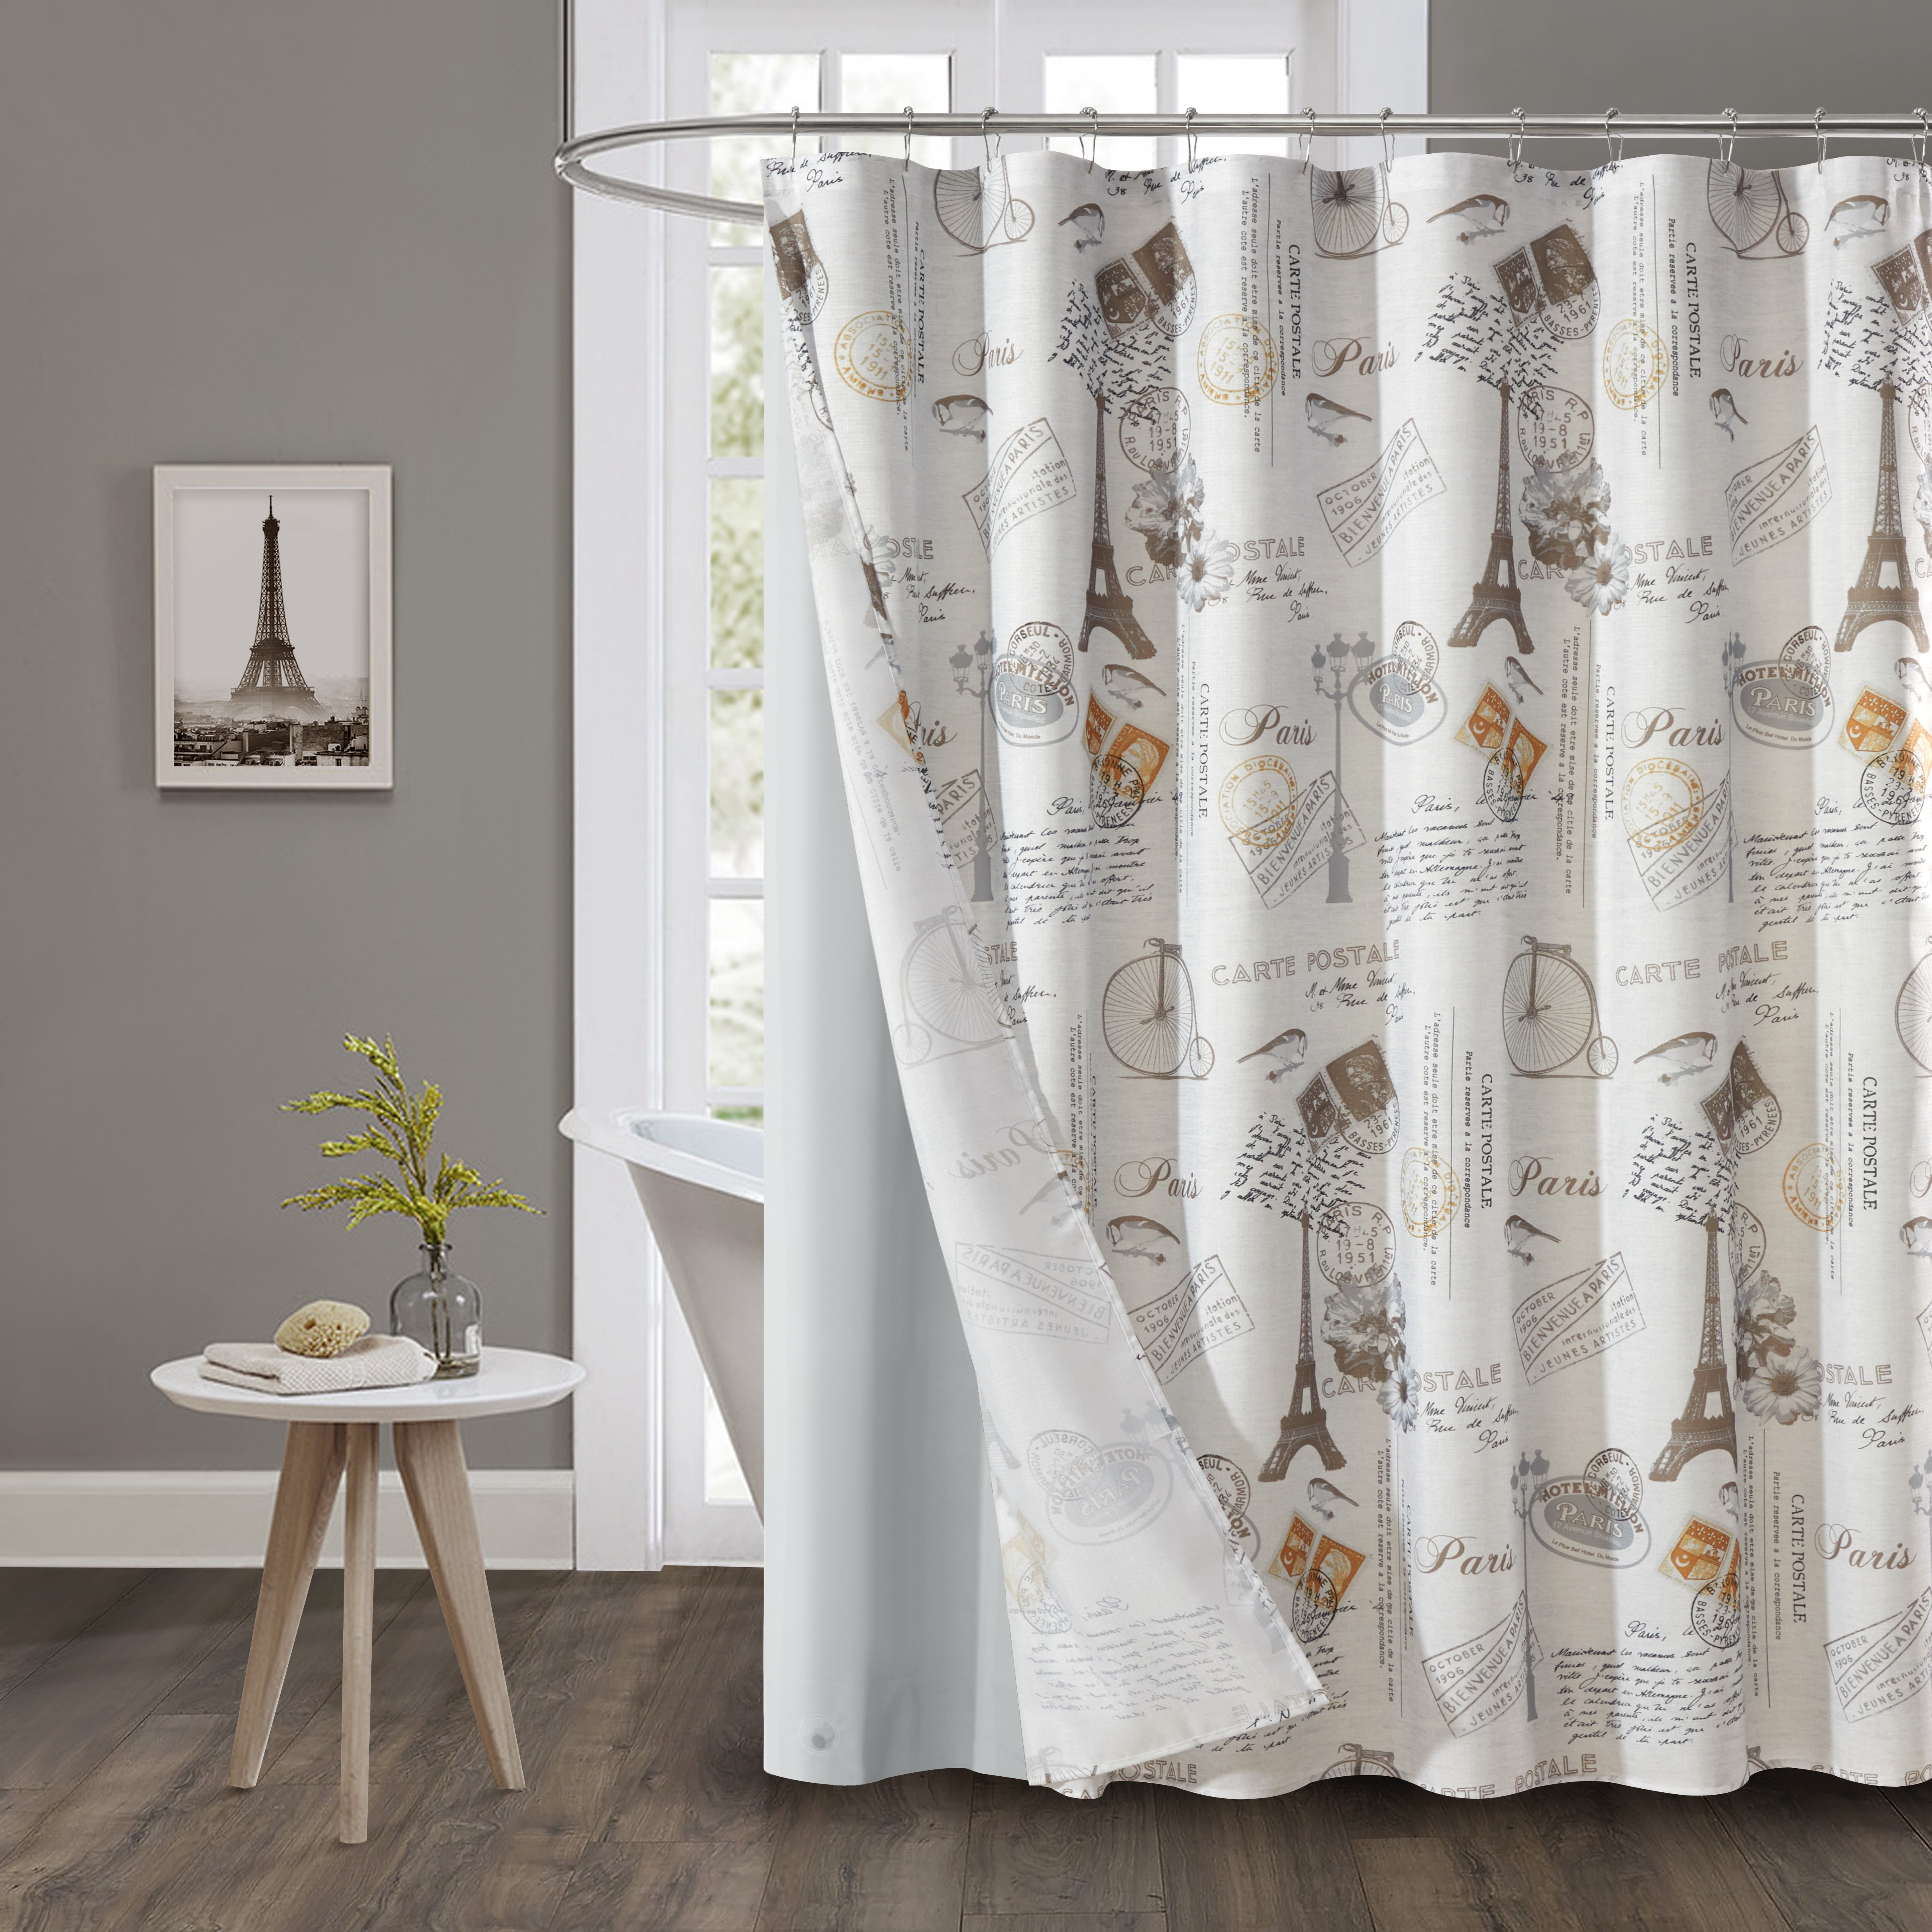 Mainstays 14 Piece Fabric Shower, Lord And Taylor Shower Curtains